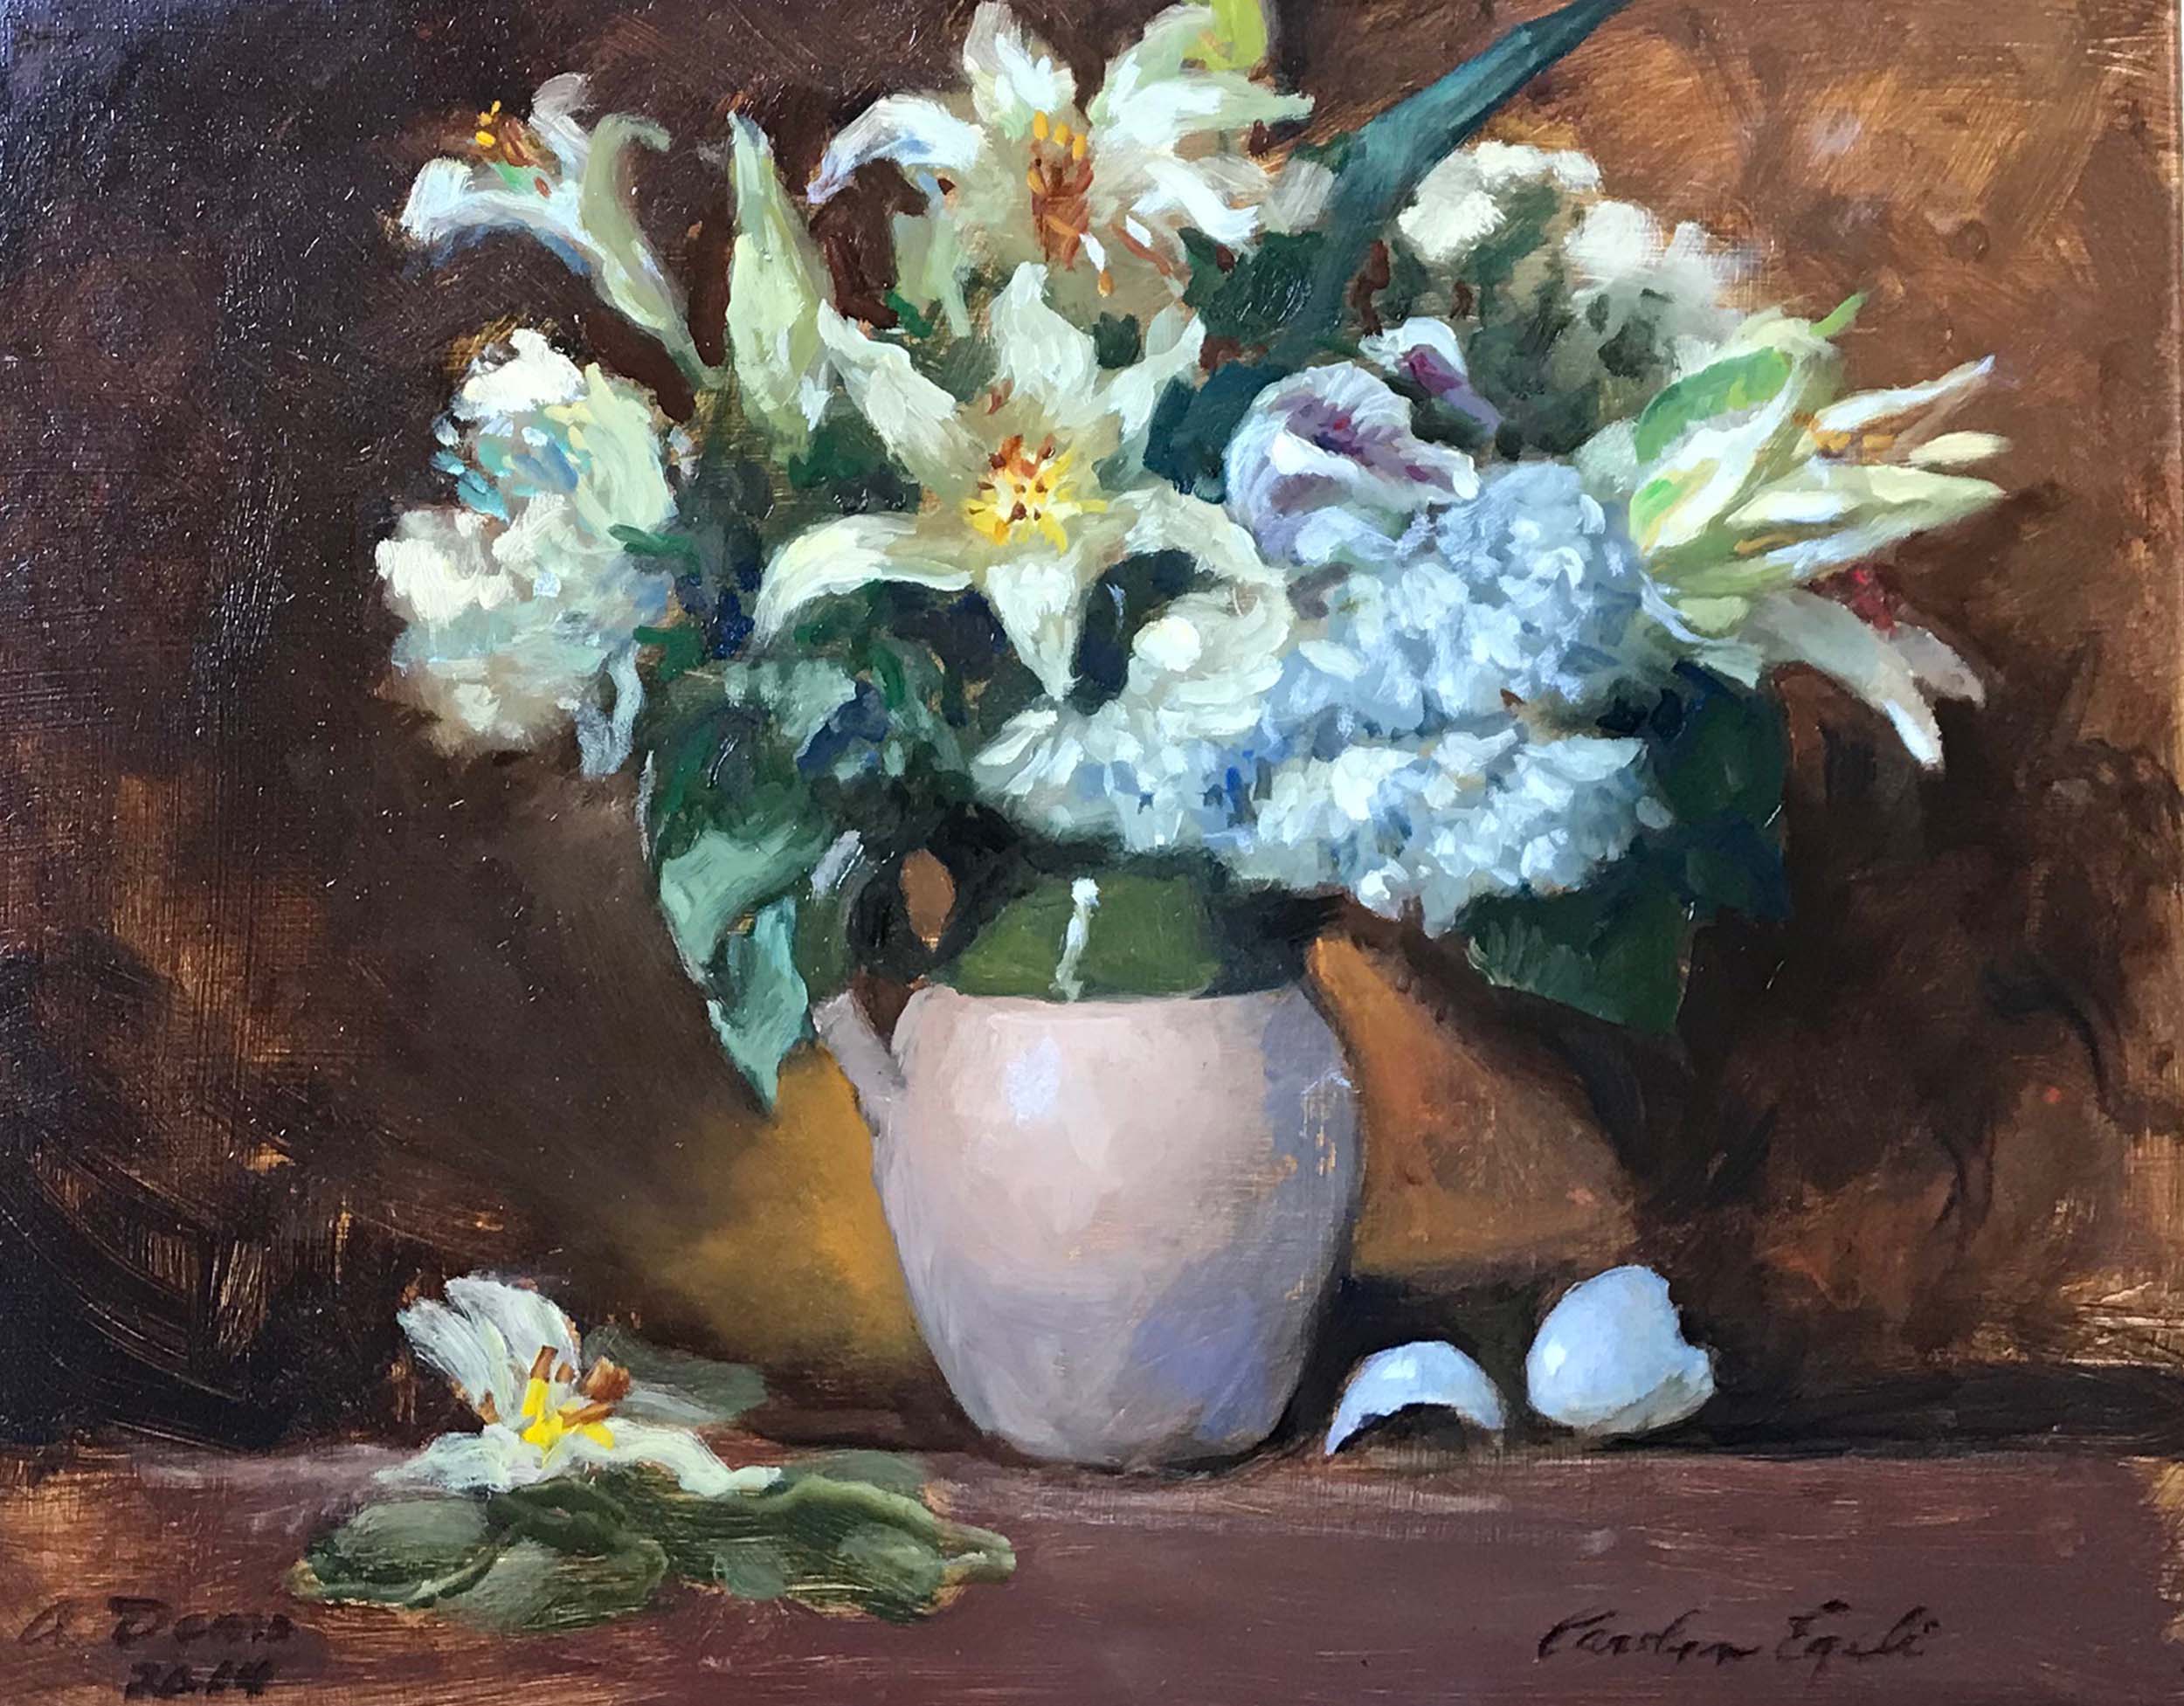 Demo for Flowers, 14” x 18”, Sold